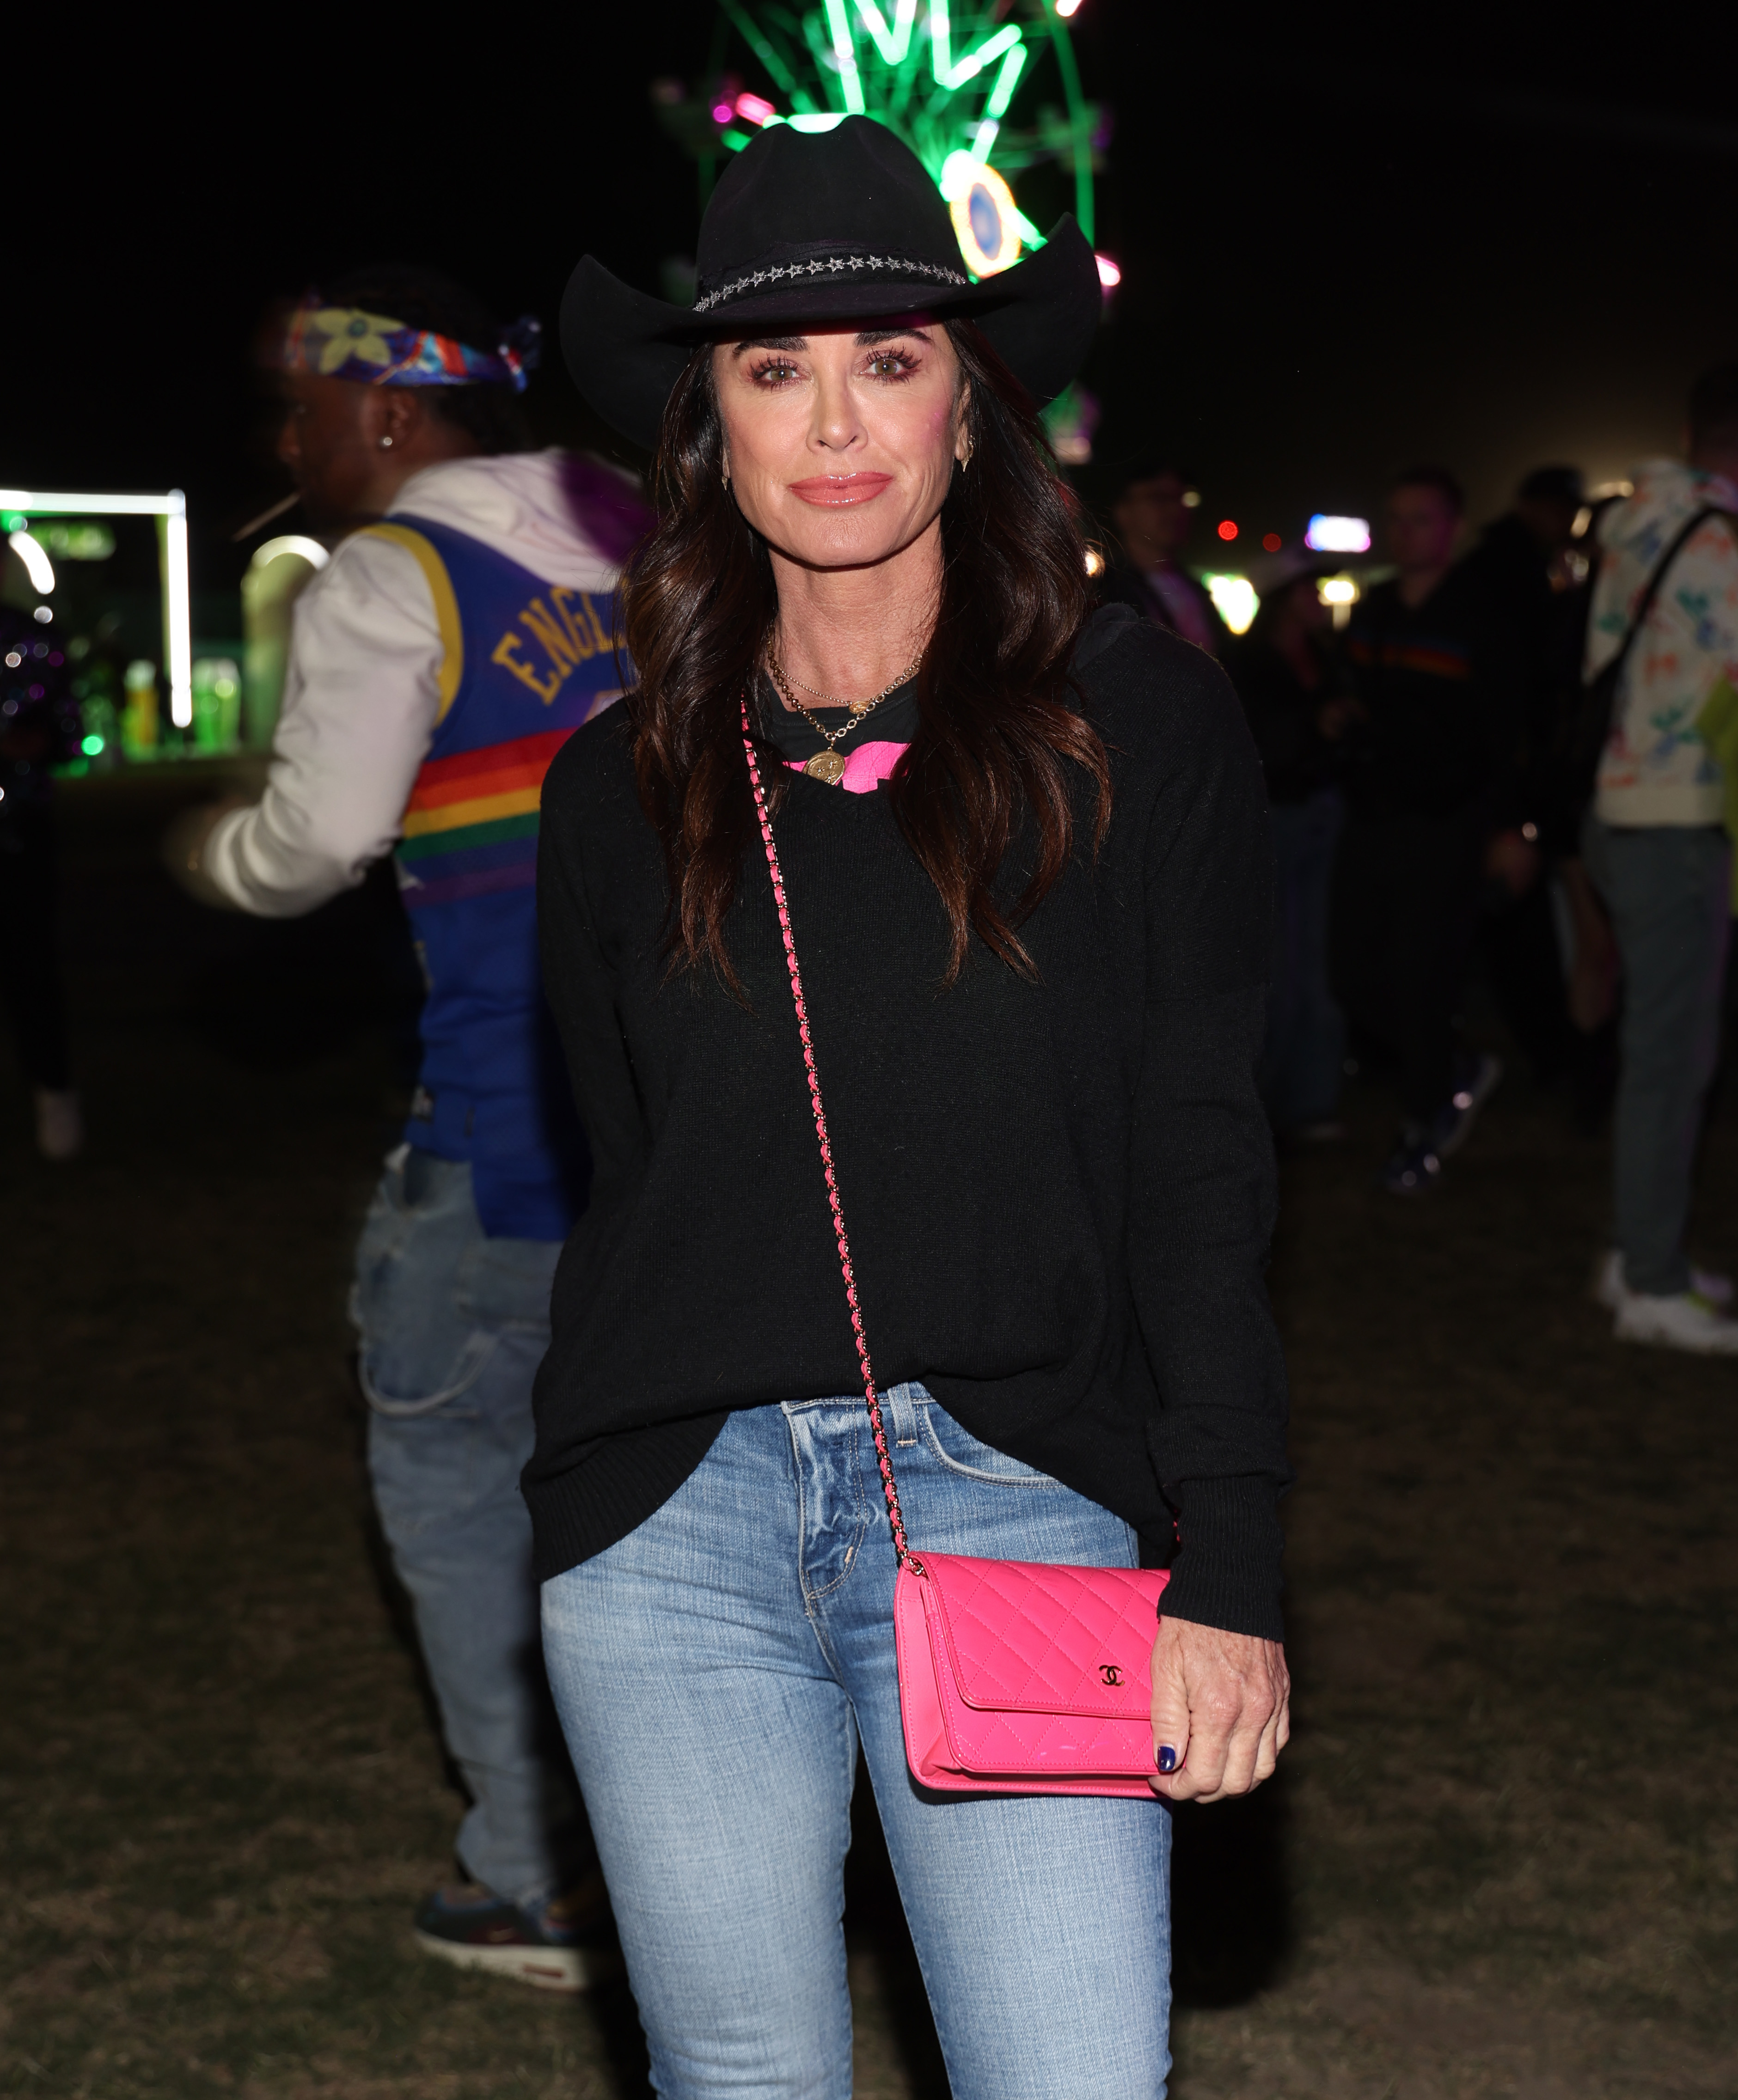 Kyle Richards at an event wearing a black top, jeans, and cowboy hat, carrying a pink bag